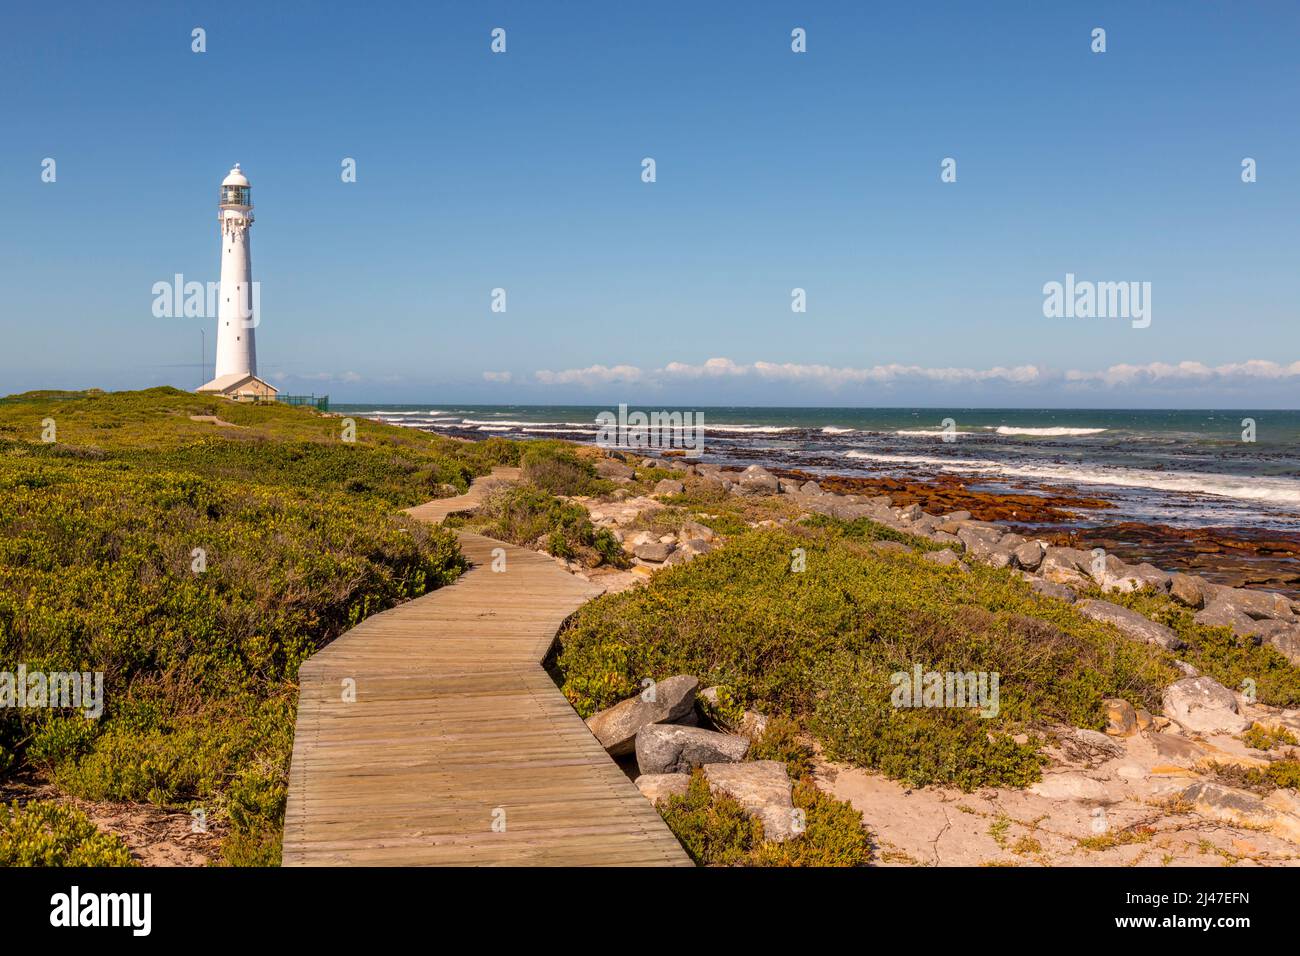 Slangkop Lighthouse, near the town of Kommetjie, near Cape Town, South Africa. It is the tallest lighthouse in South Africa. Stock Photo